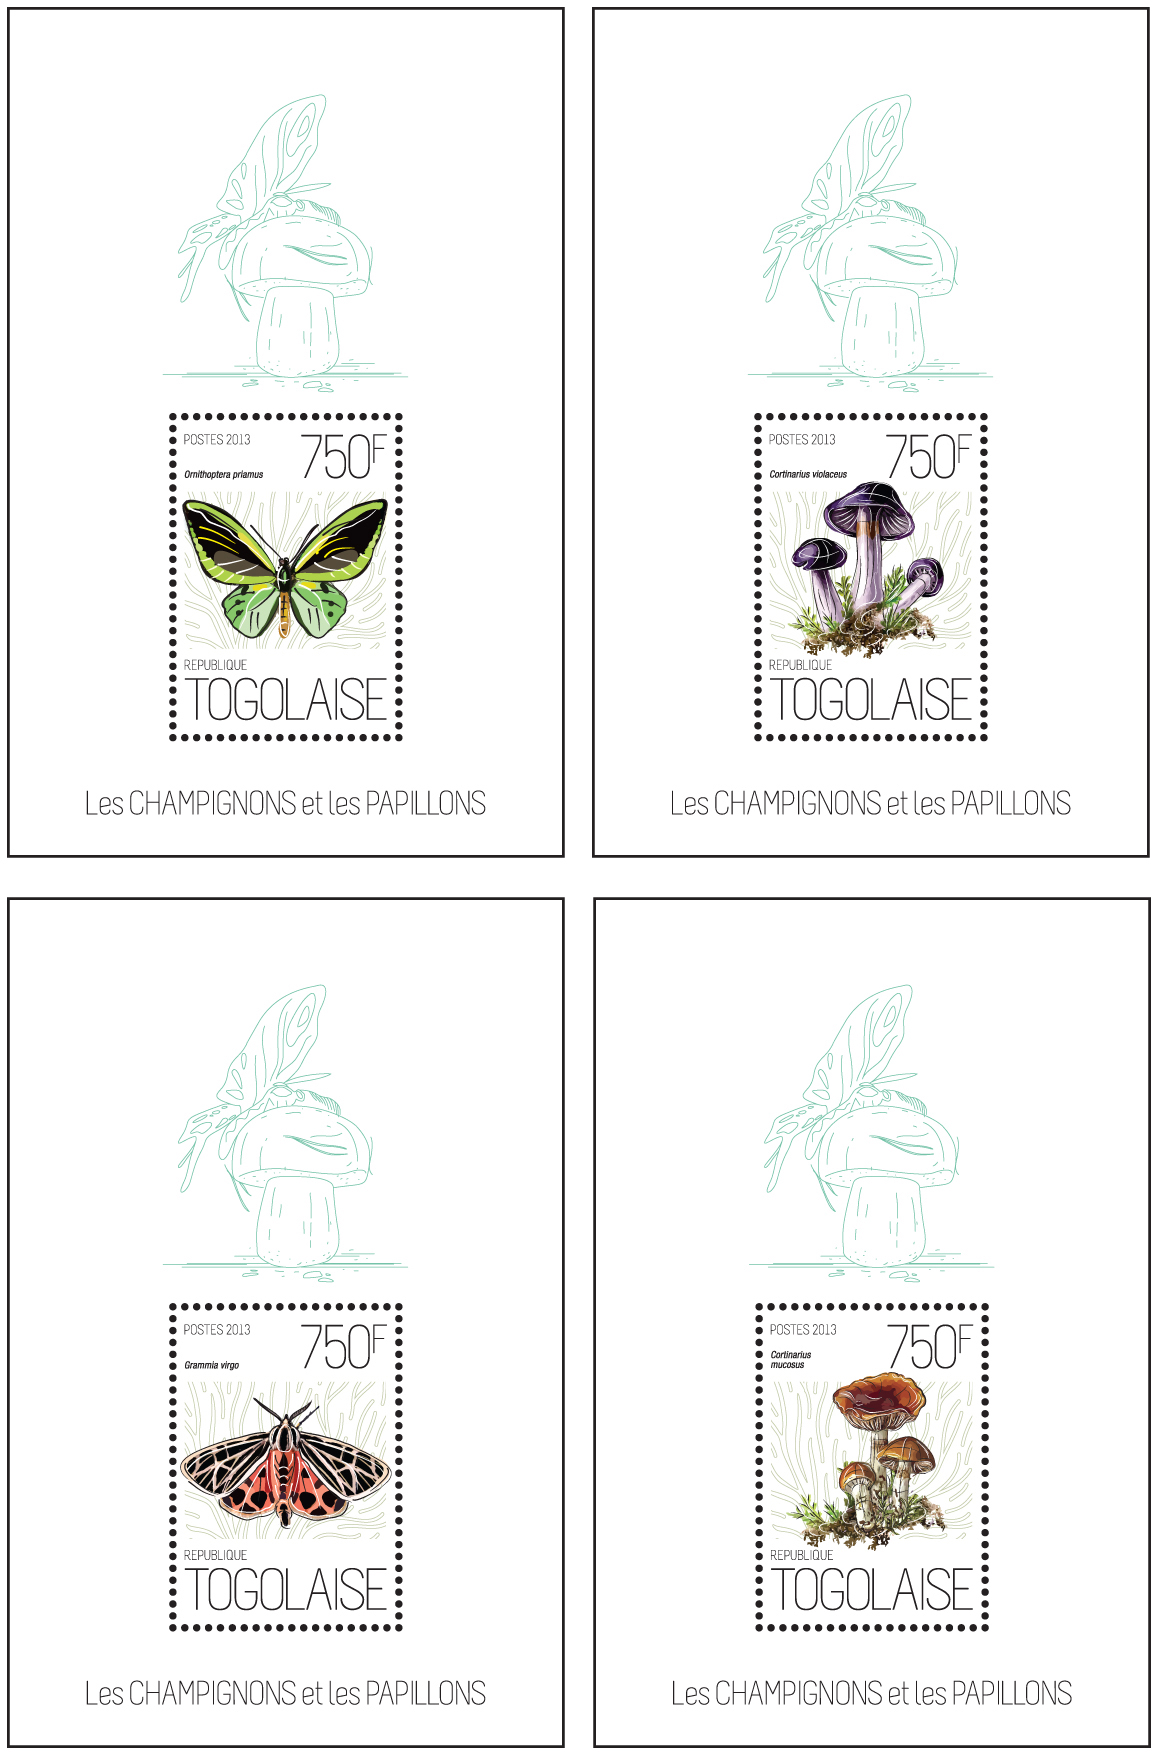 Mushrooms and Butterflies - Issue of Togo postage stamps